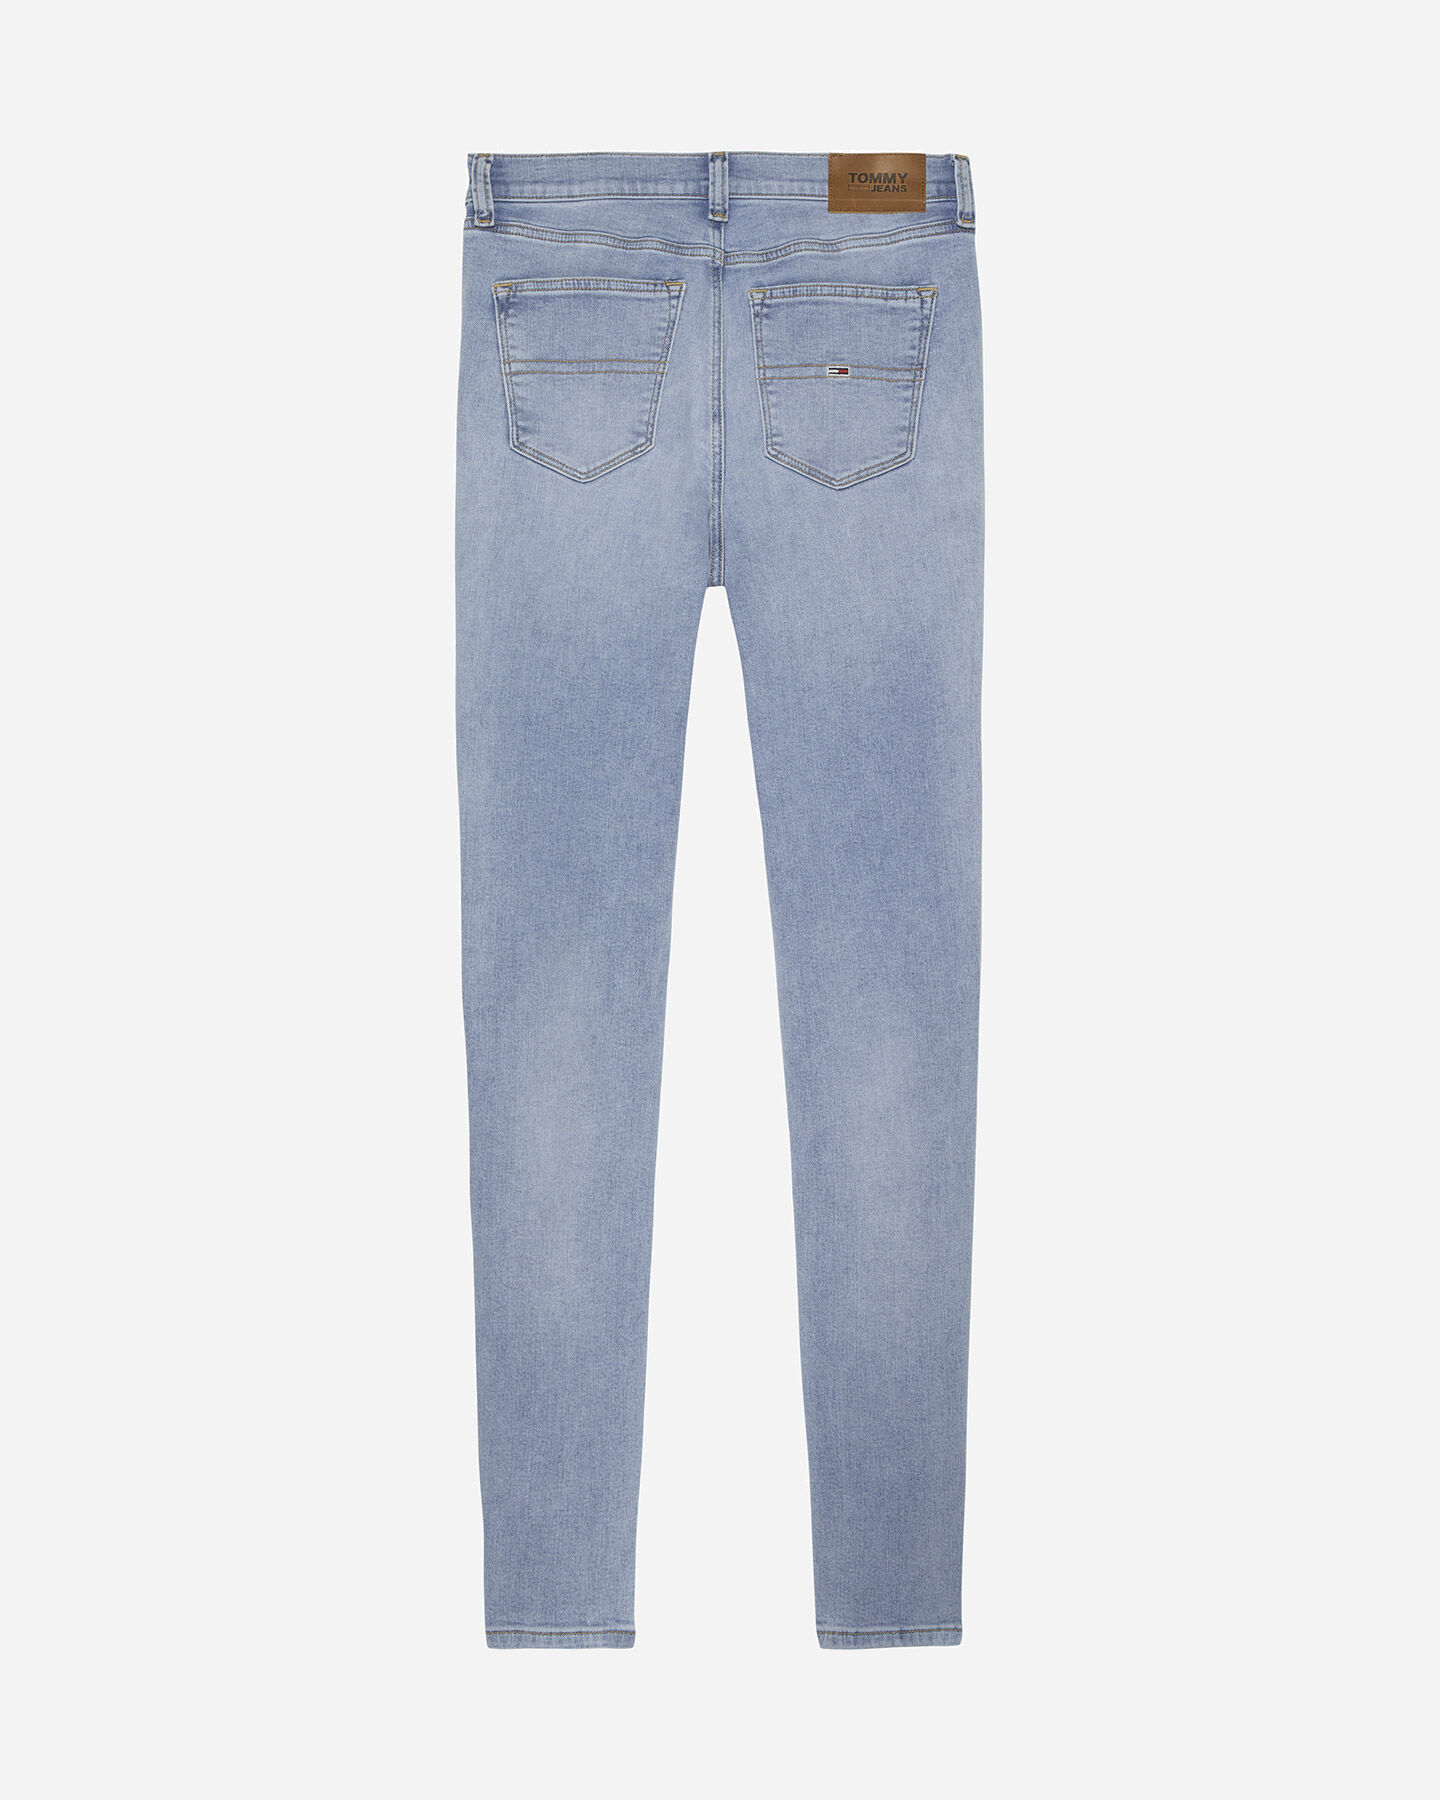  Jeans TOMMY HILFIGER NORA SKINNY W S4122979|1AB|26 scatto 1